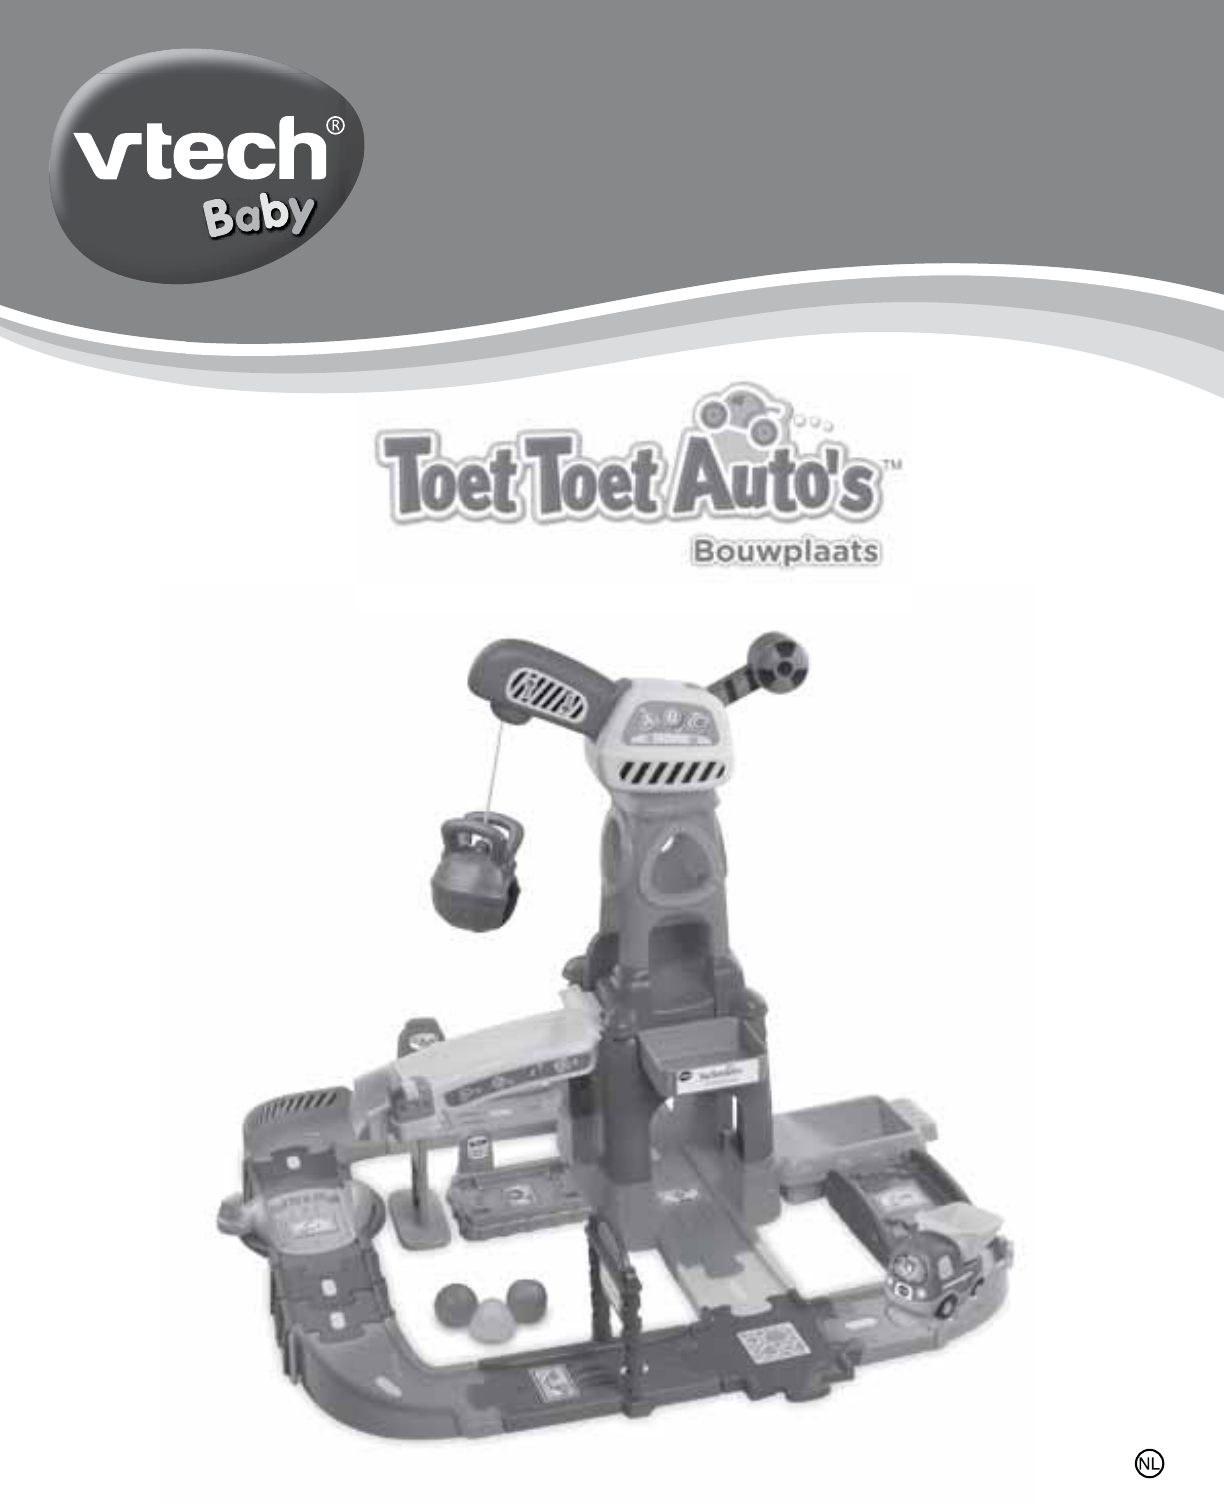 Manual VTech Toet Toet Auto s Bouwplaats (page 1 of (Dutch)